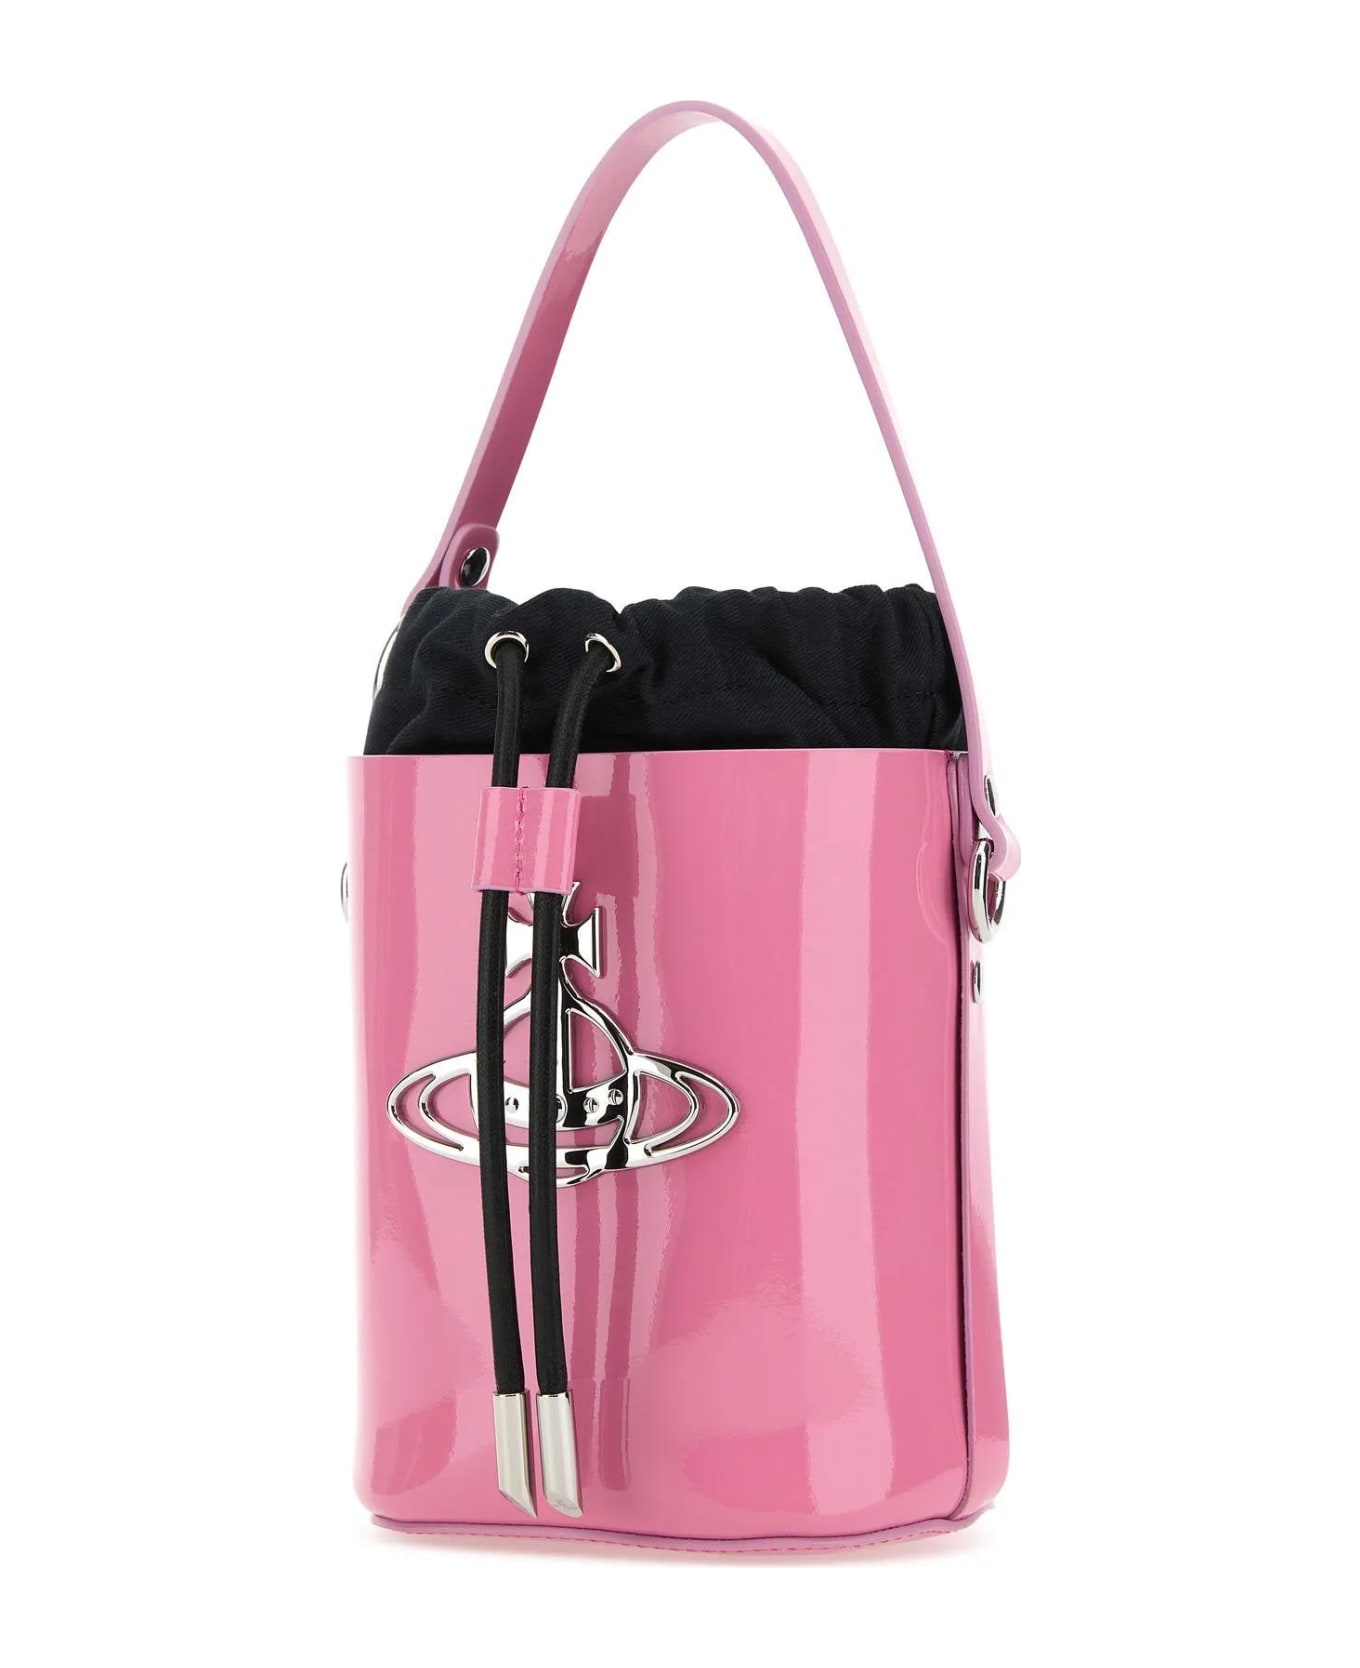 Vivienne Westwood Pink Leather Small Daisy Bucket Bag - Pink